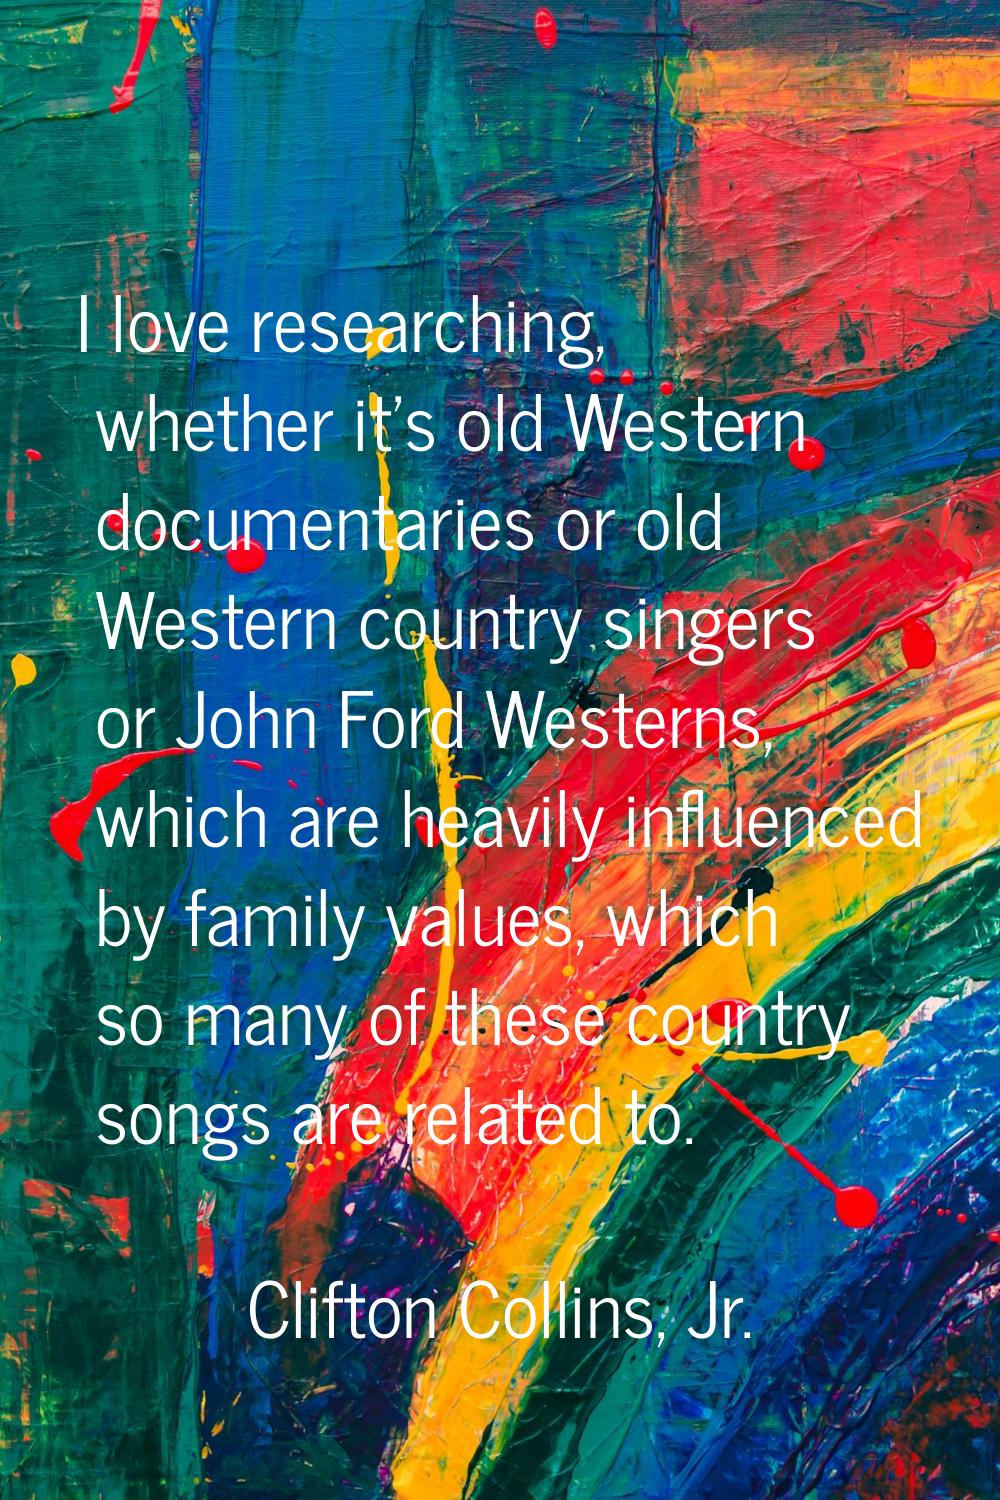 I love researching, whether it's old Western documentaries or old Western country singers or John F